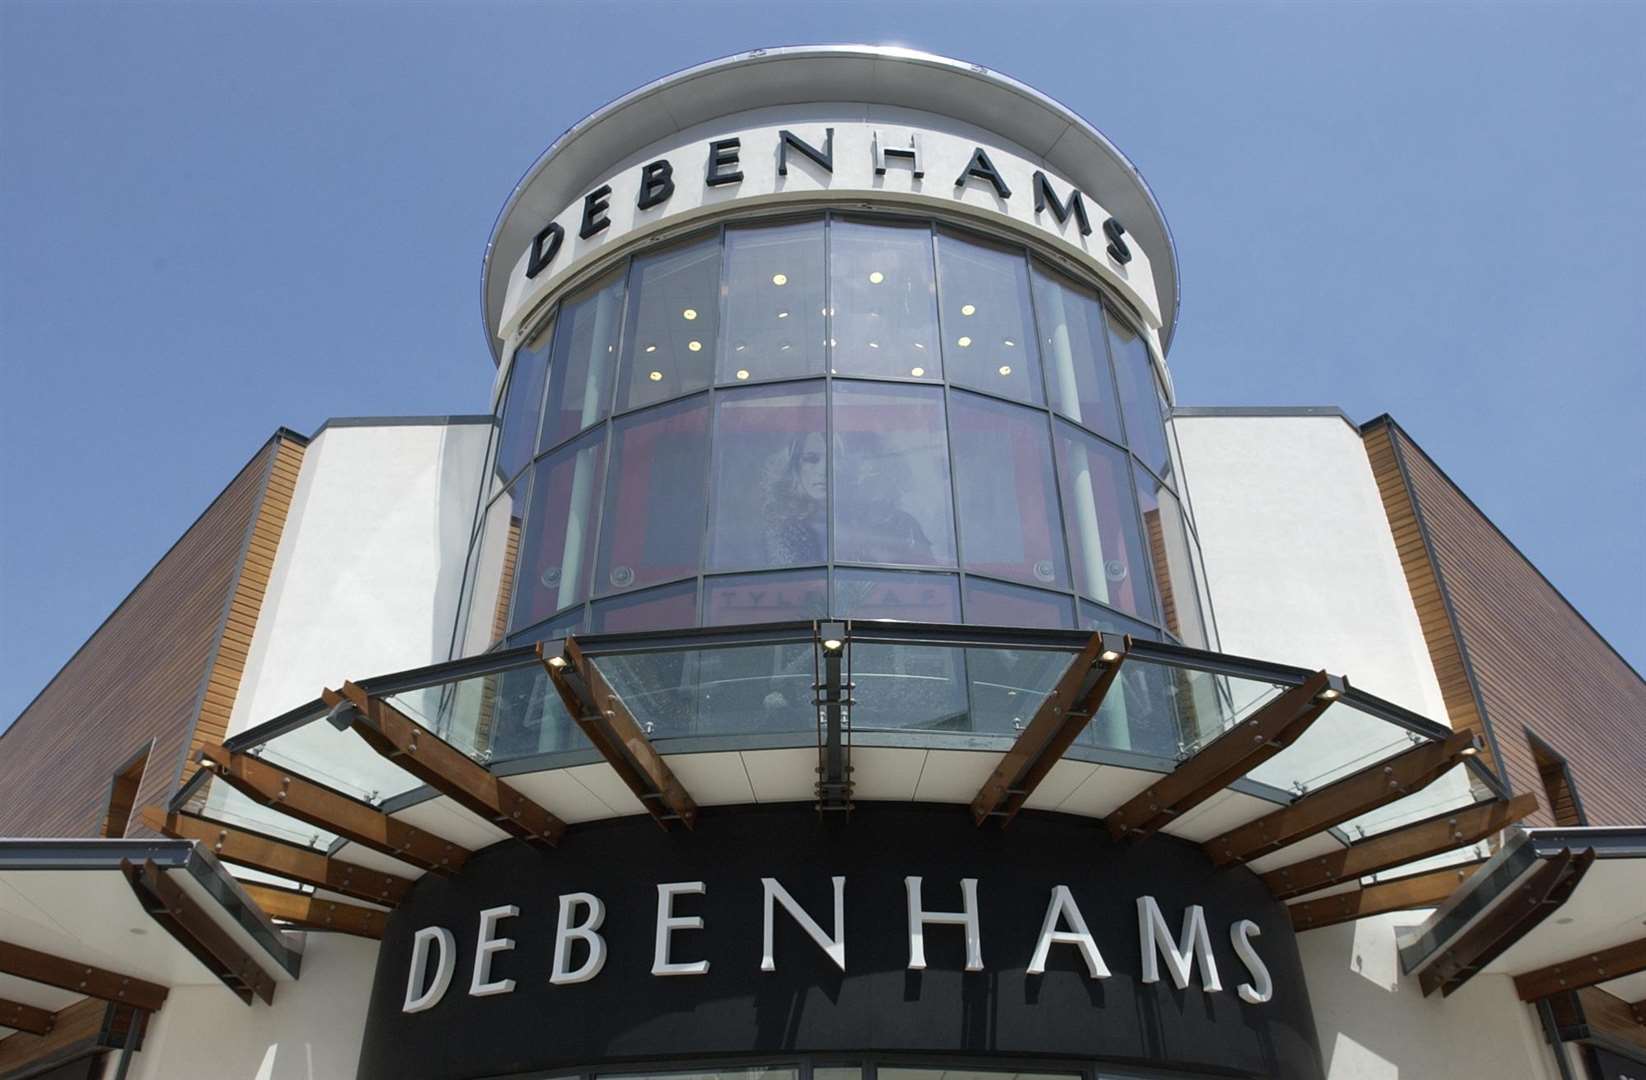 Debenhams at Westwood Cross - the retail giant has seen a steady decline over recent years